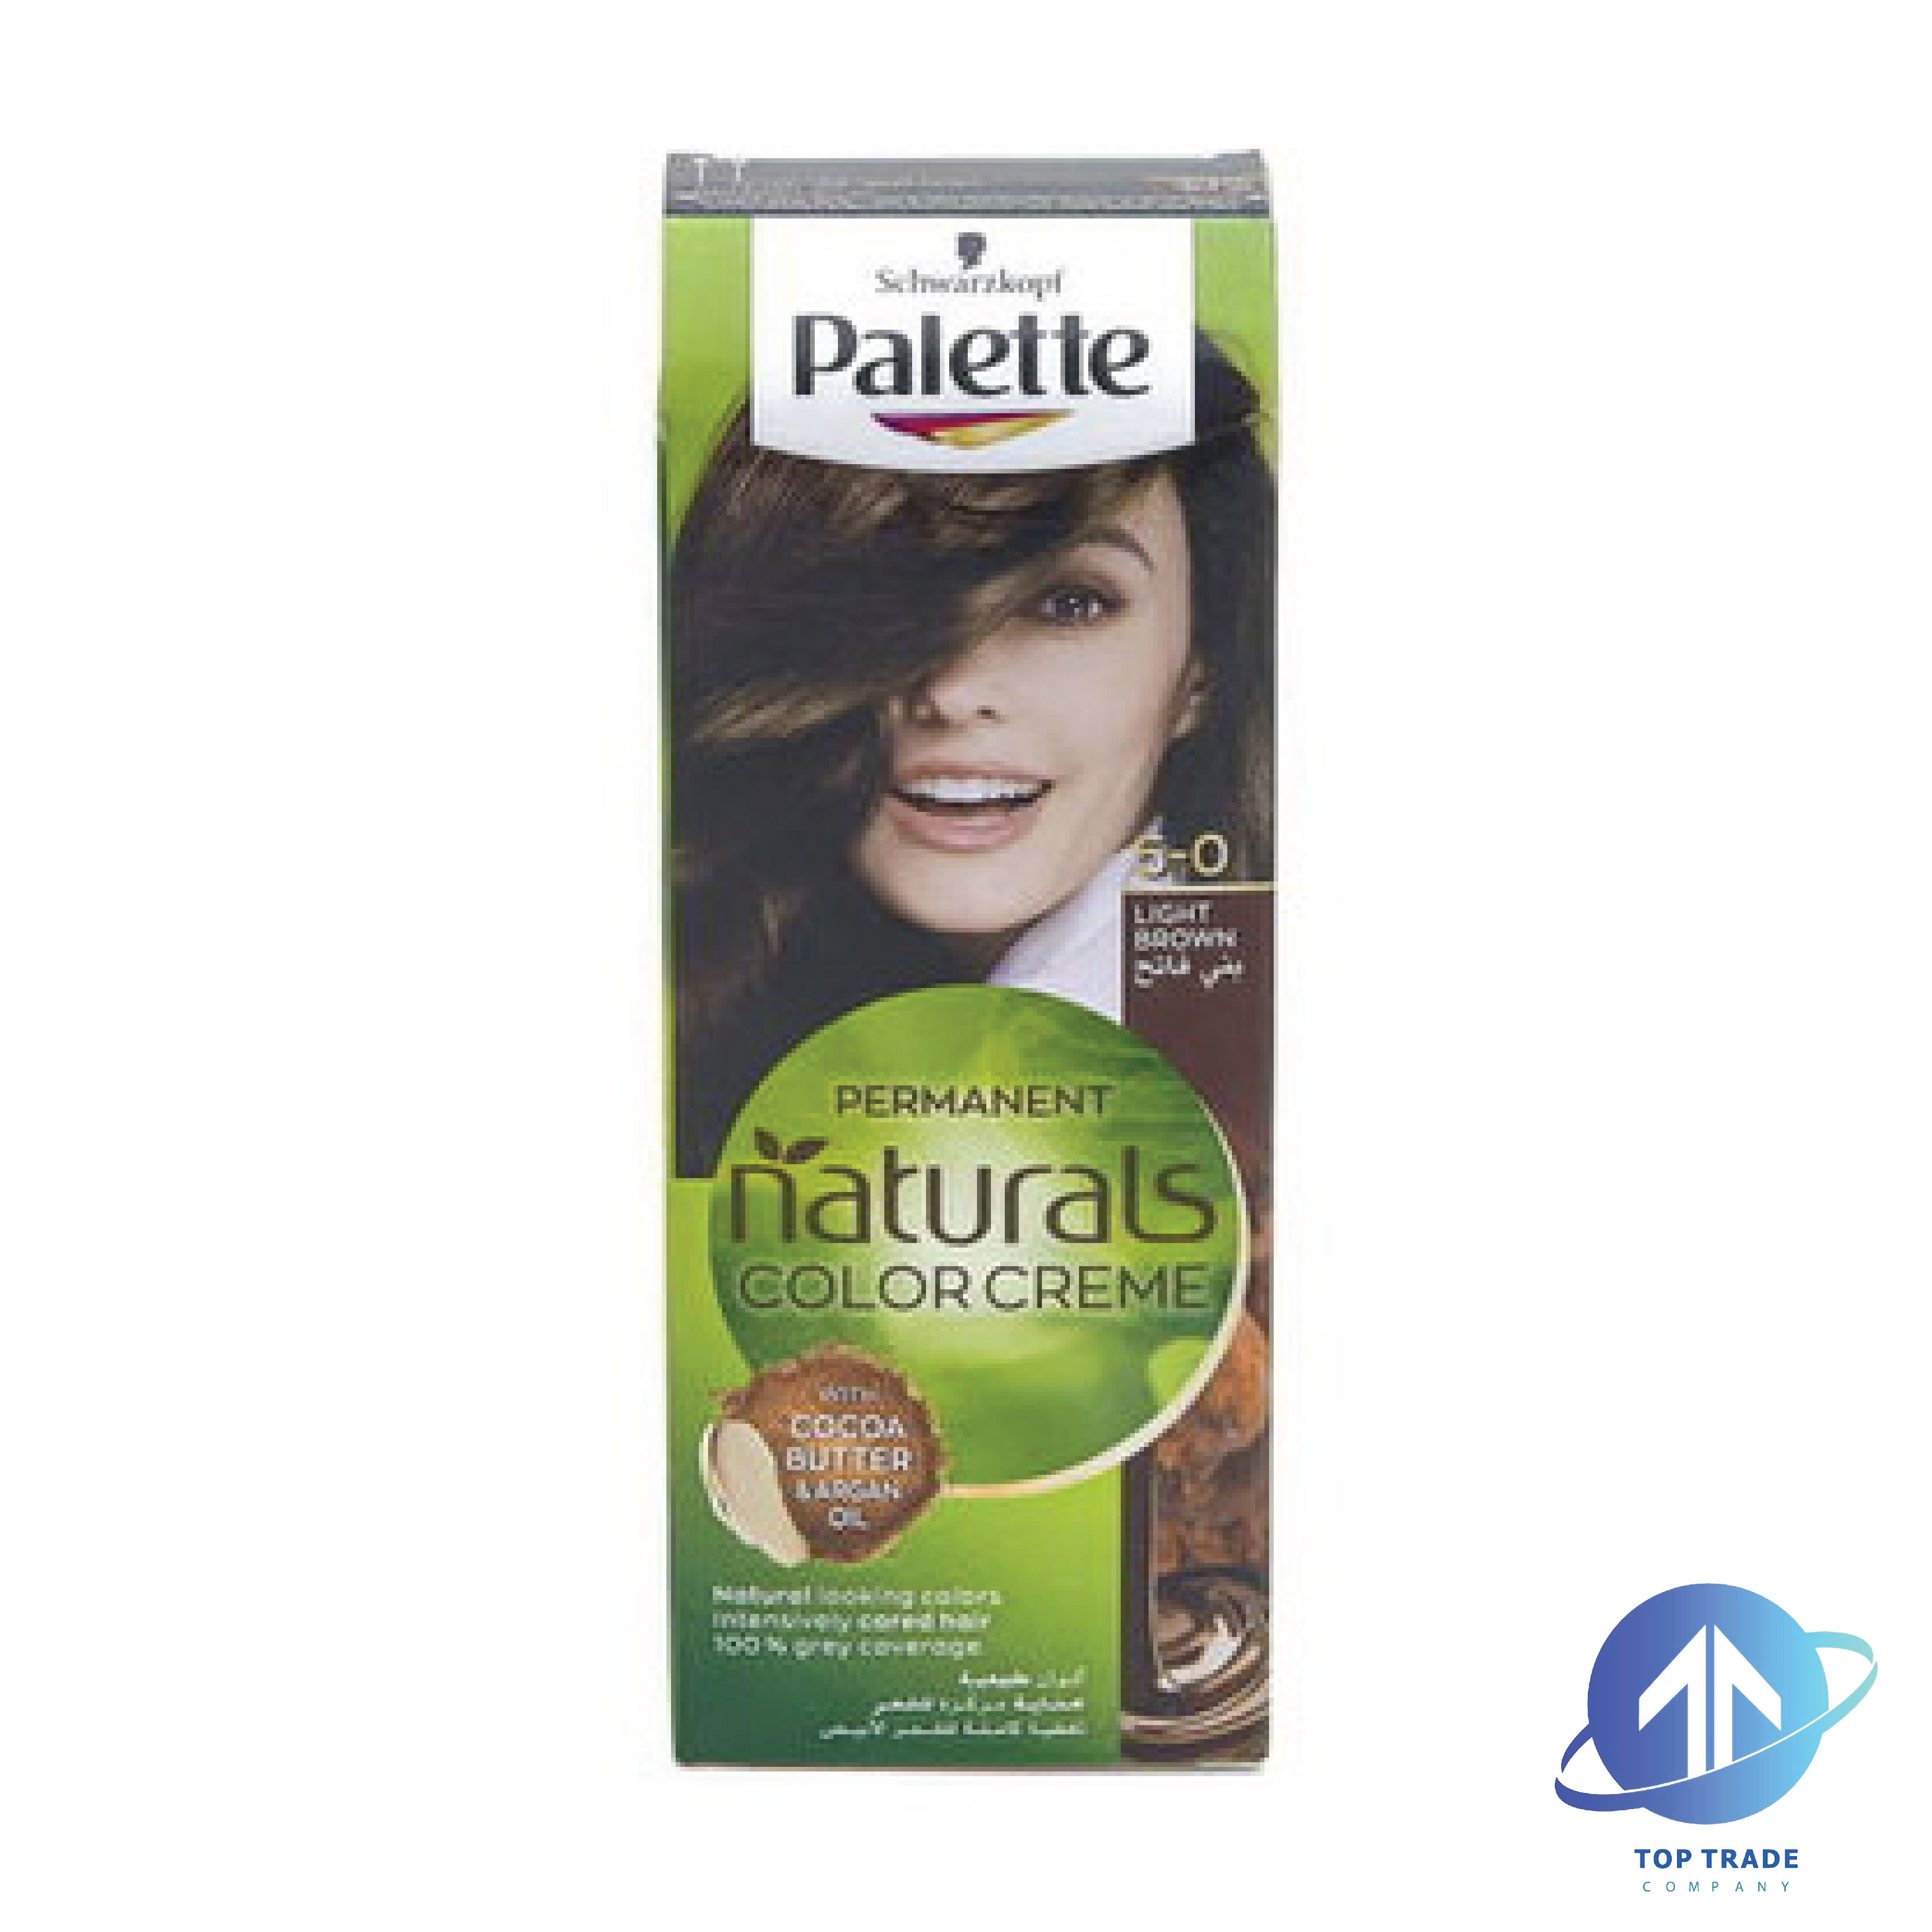 Palette hair coloring with argon oil hair color 5-0 lichtbruin